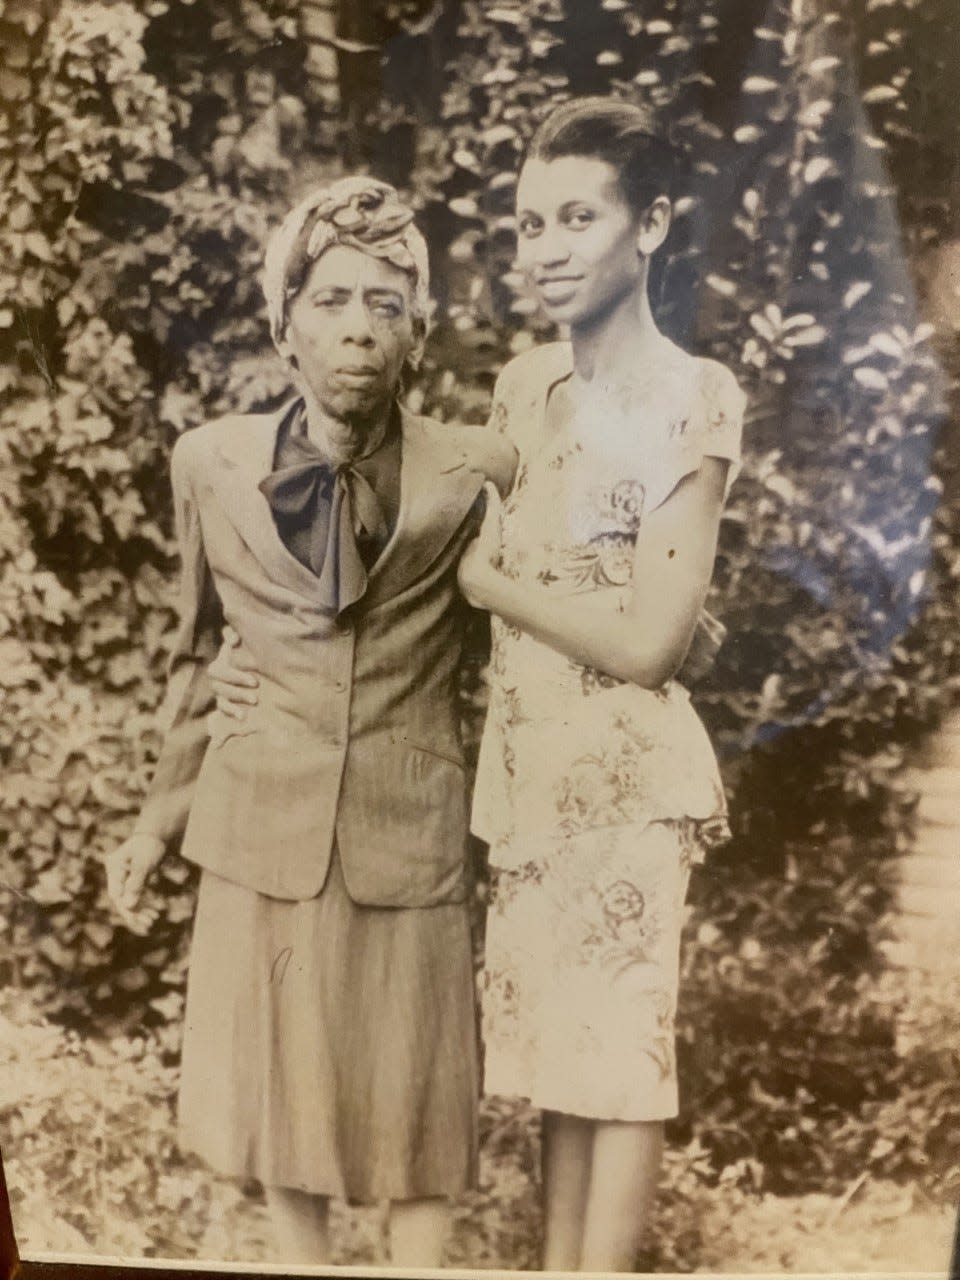 This photo shows Ora Jackson as a young woman (right) with her mother, Frances Cooley.